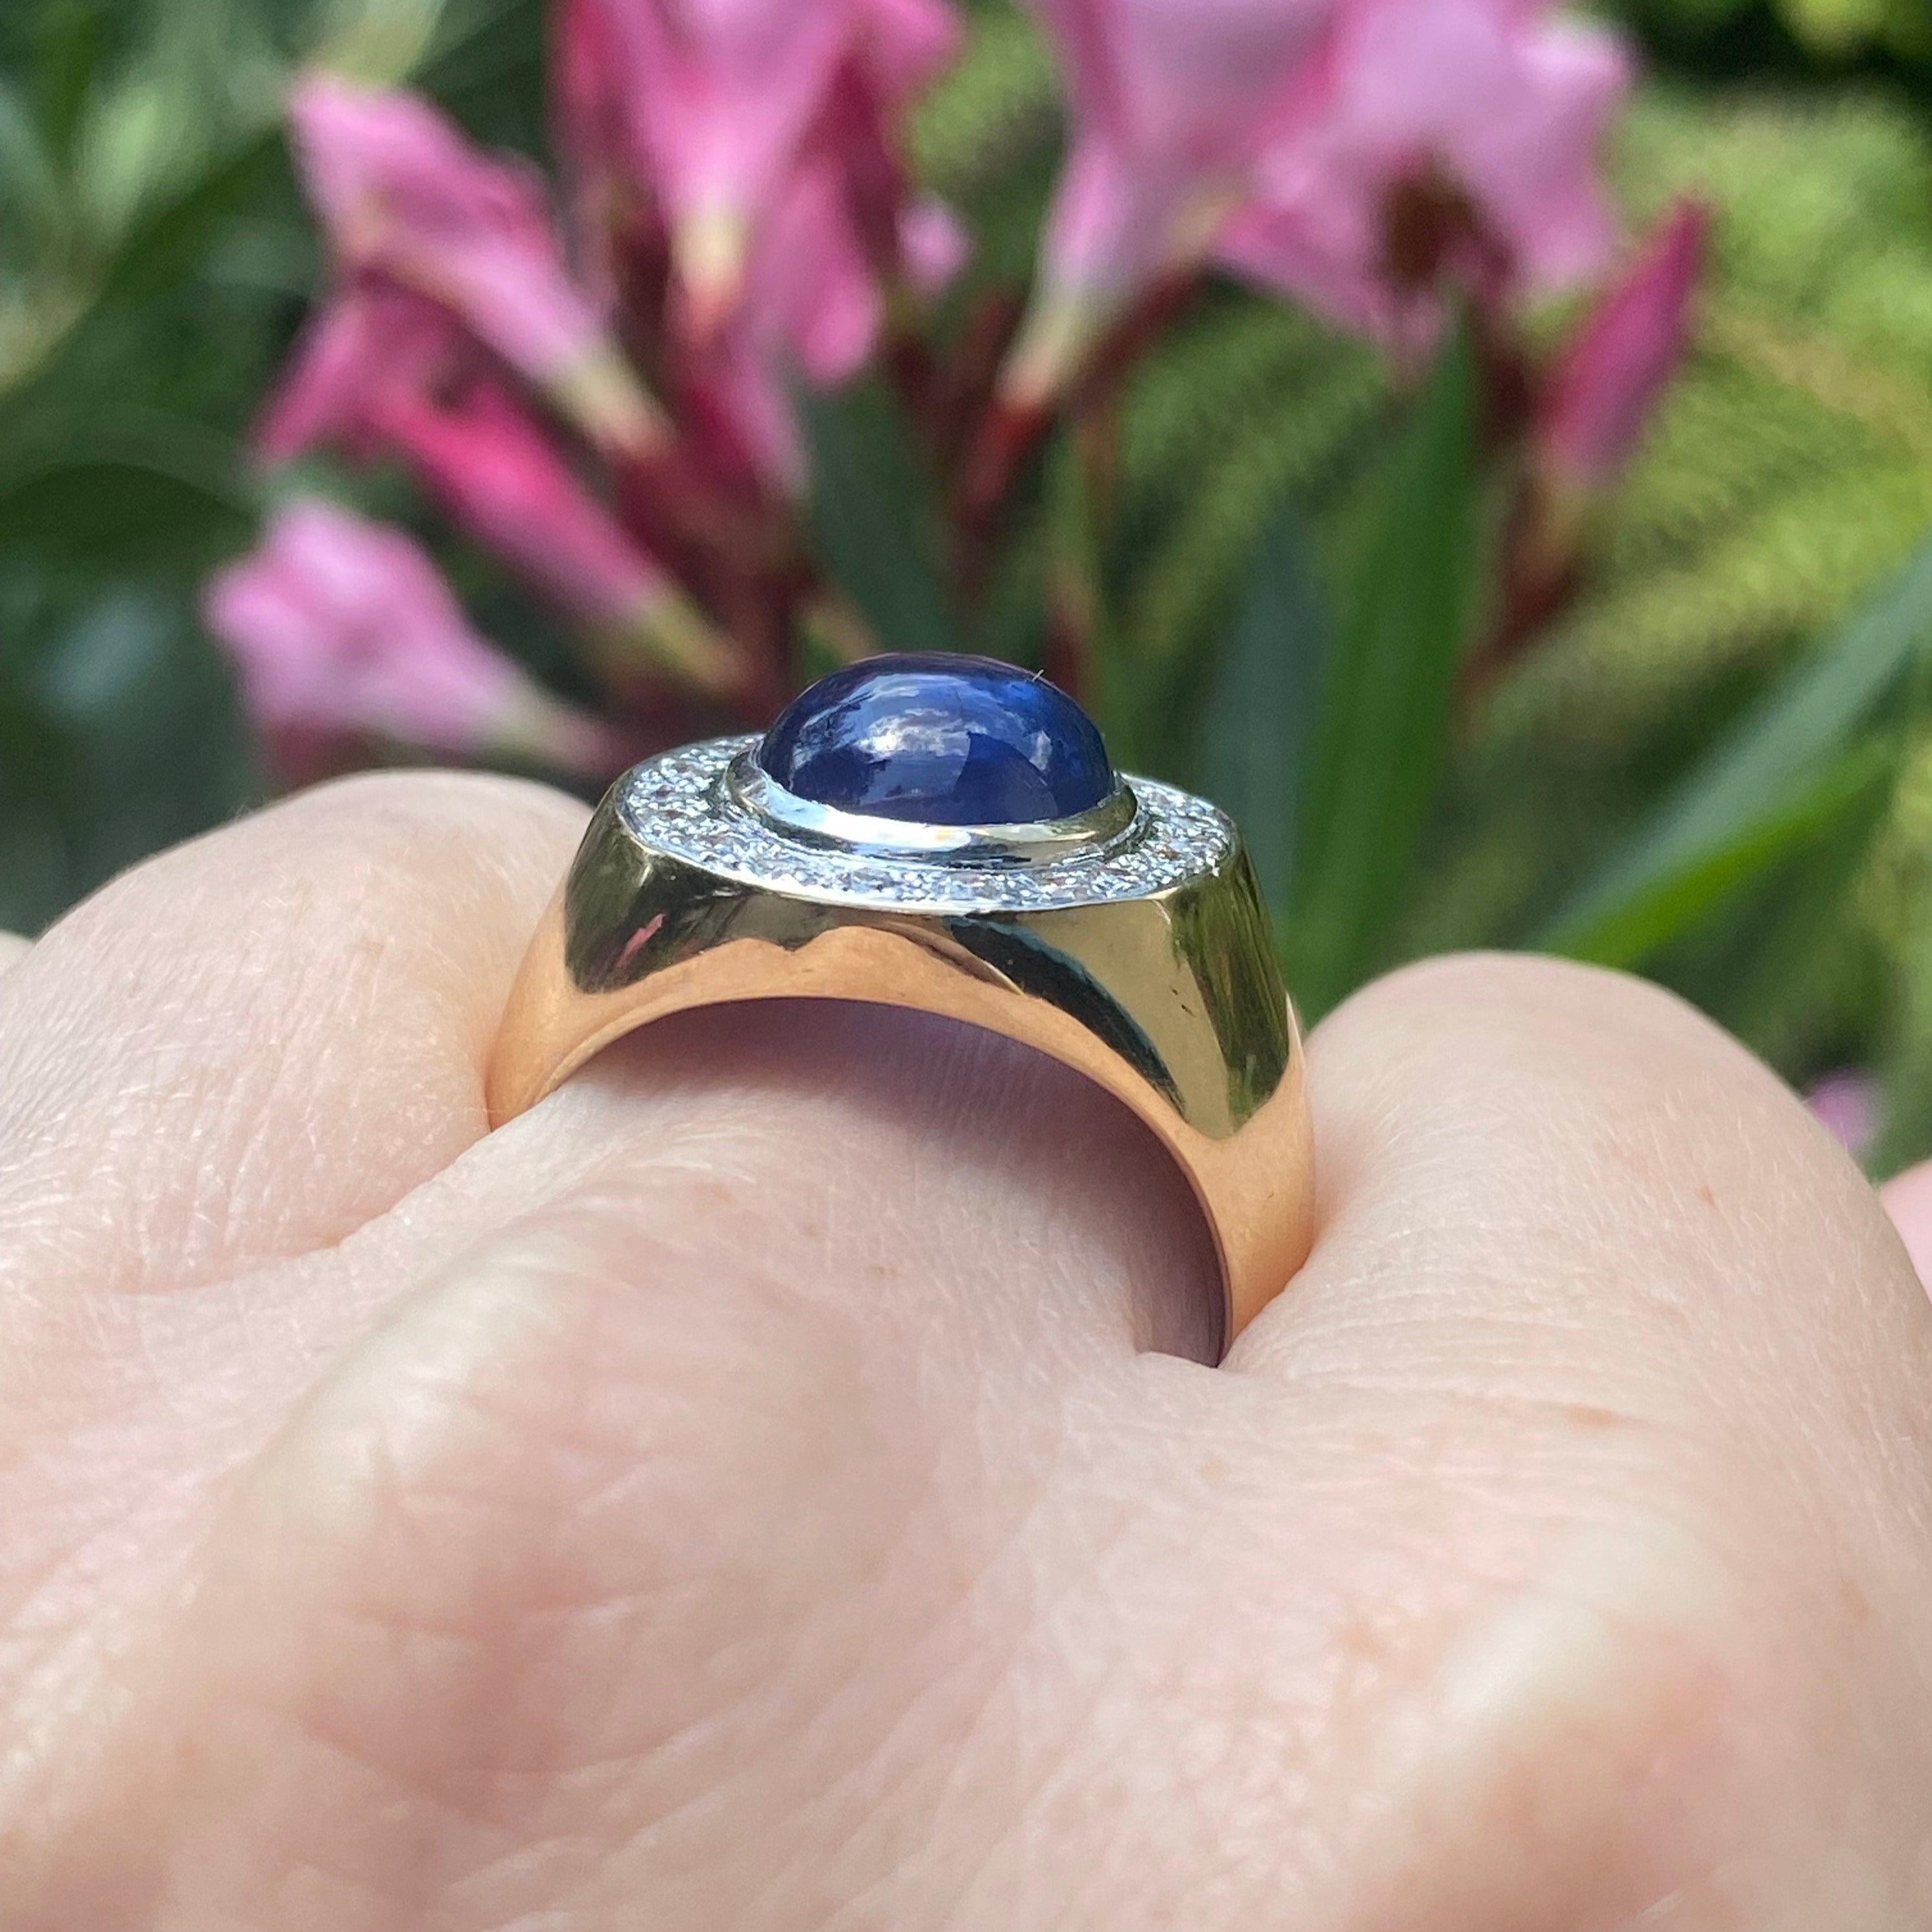 Vintage 18K gold ring featuring a round sapphire cabochon set within a bezel of diamonds, supported by fifteen millimeter wide shoulders tapering down to a five and a half millimeter wide band. Bright polish finish.
Sapphire: approx. 4 carats
19